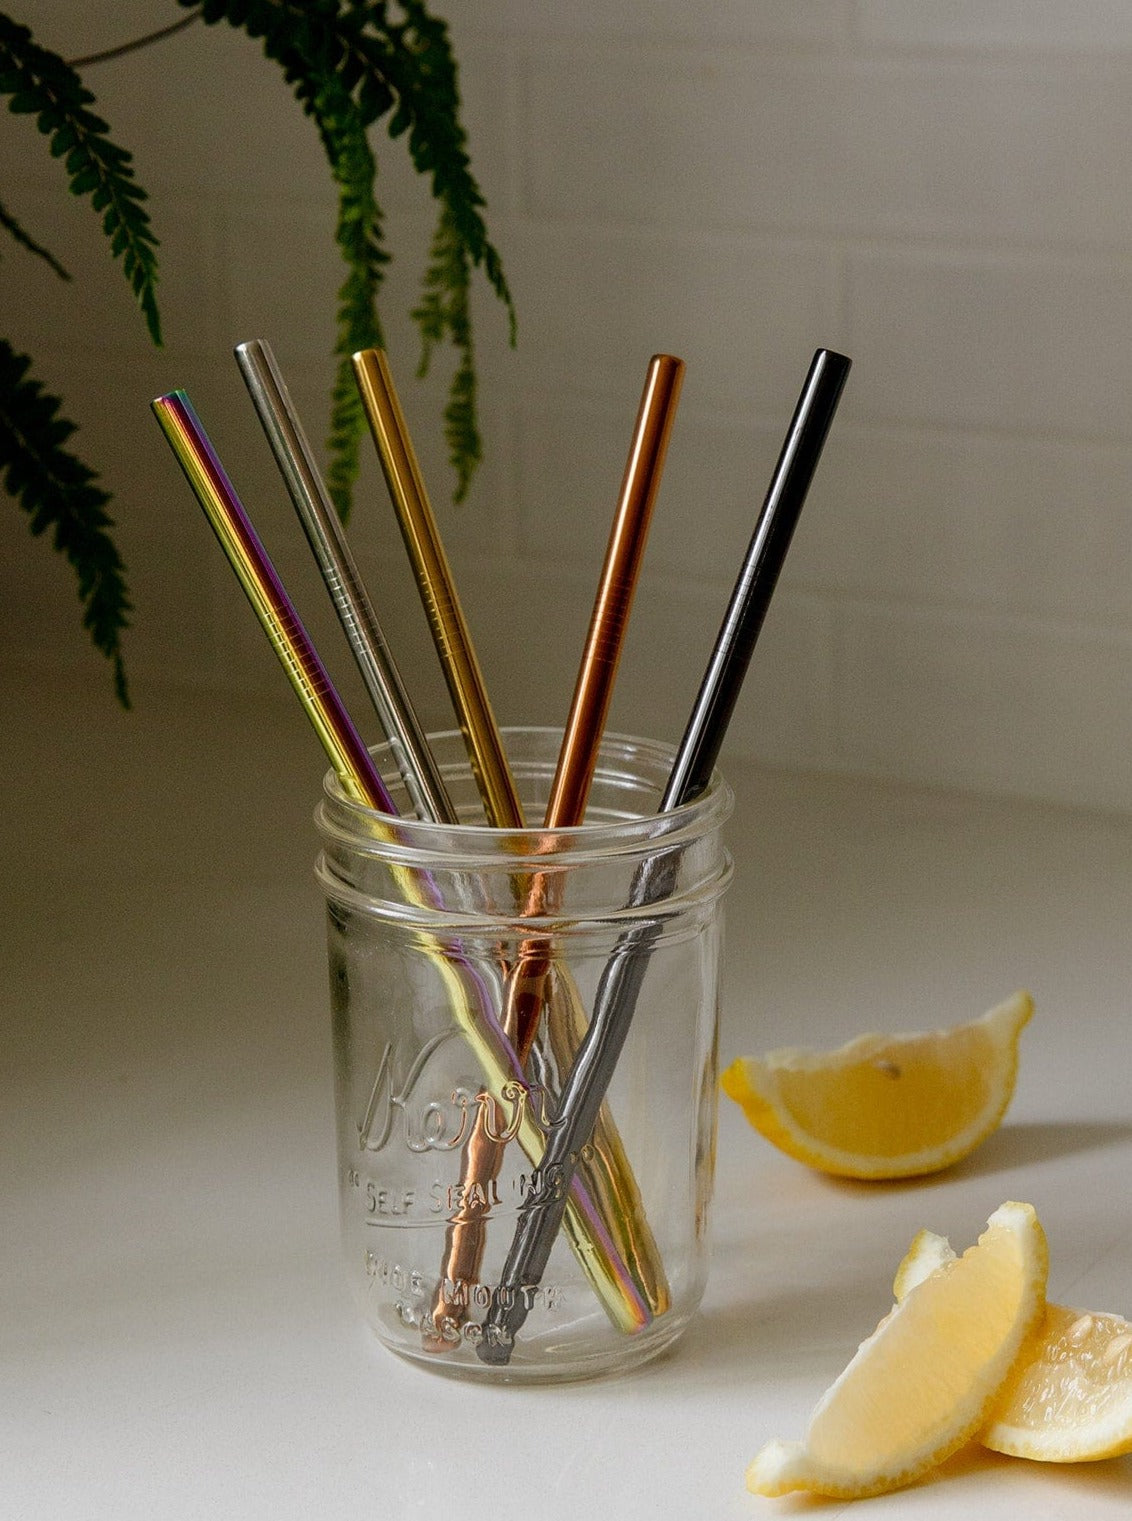 8.5 Bent Stainless Steel Straw (4 pack)